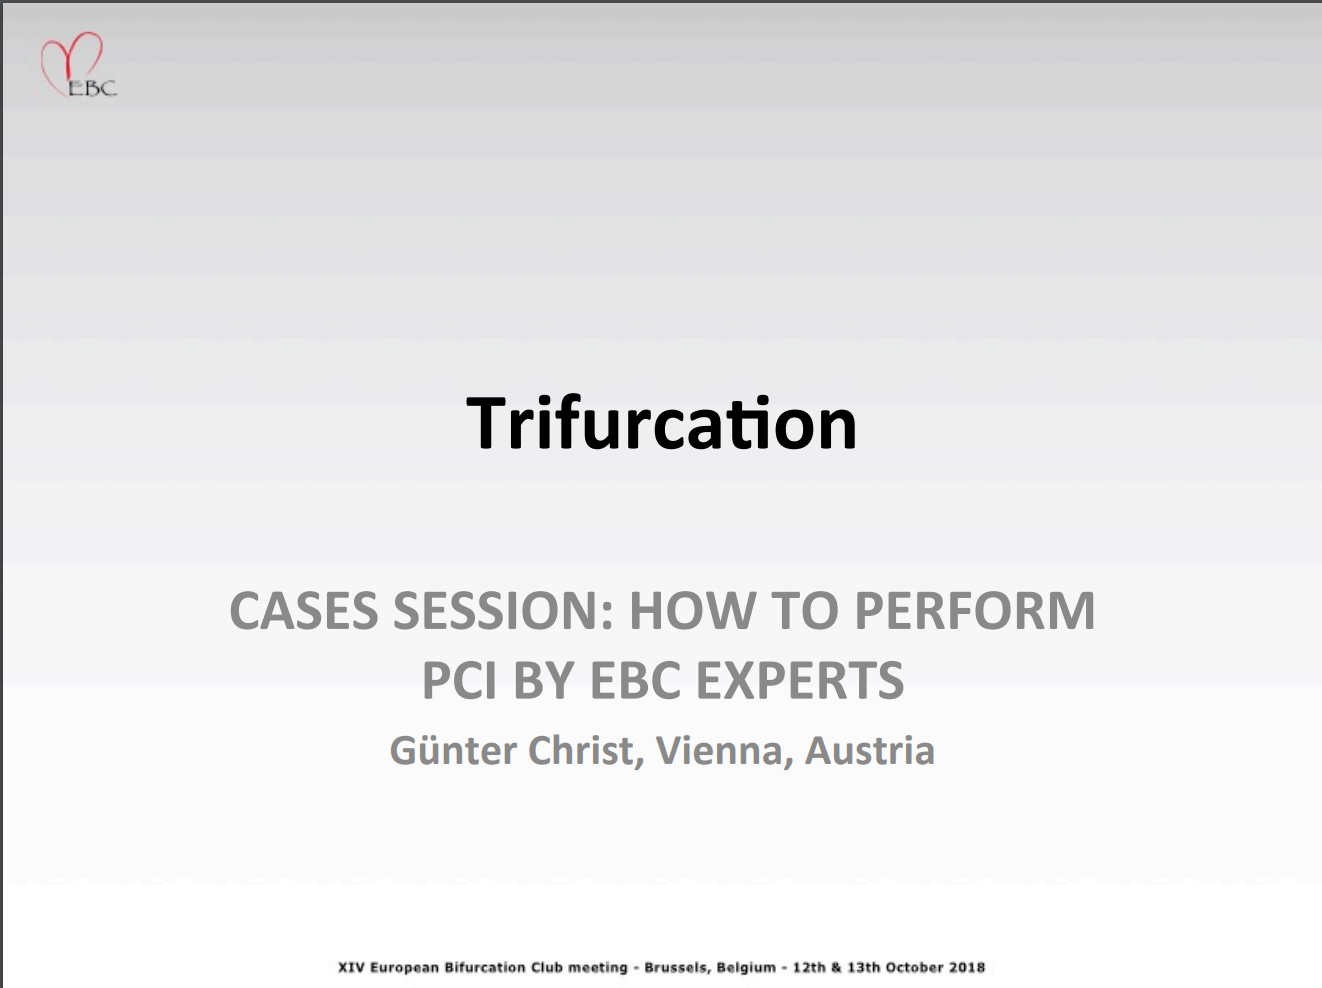 You are currently viewing Trifurcation Cases Session: How to perform PCI by EBC experts